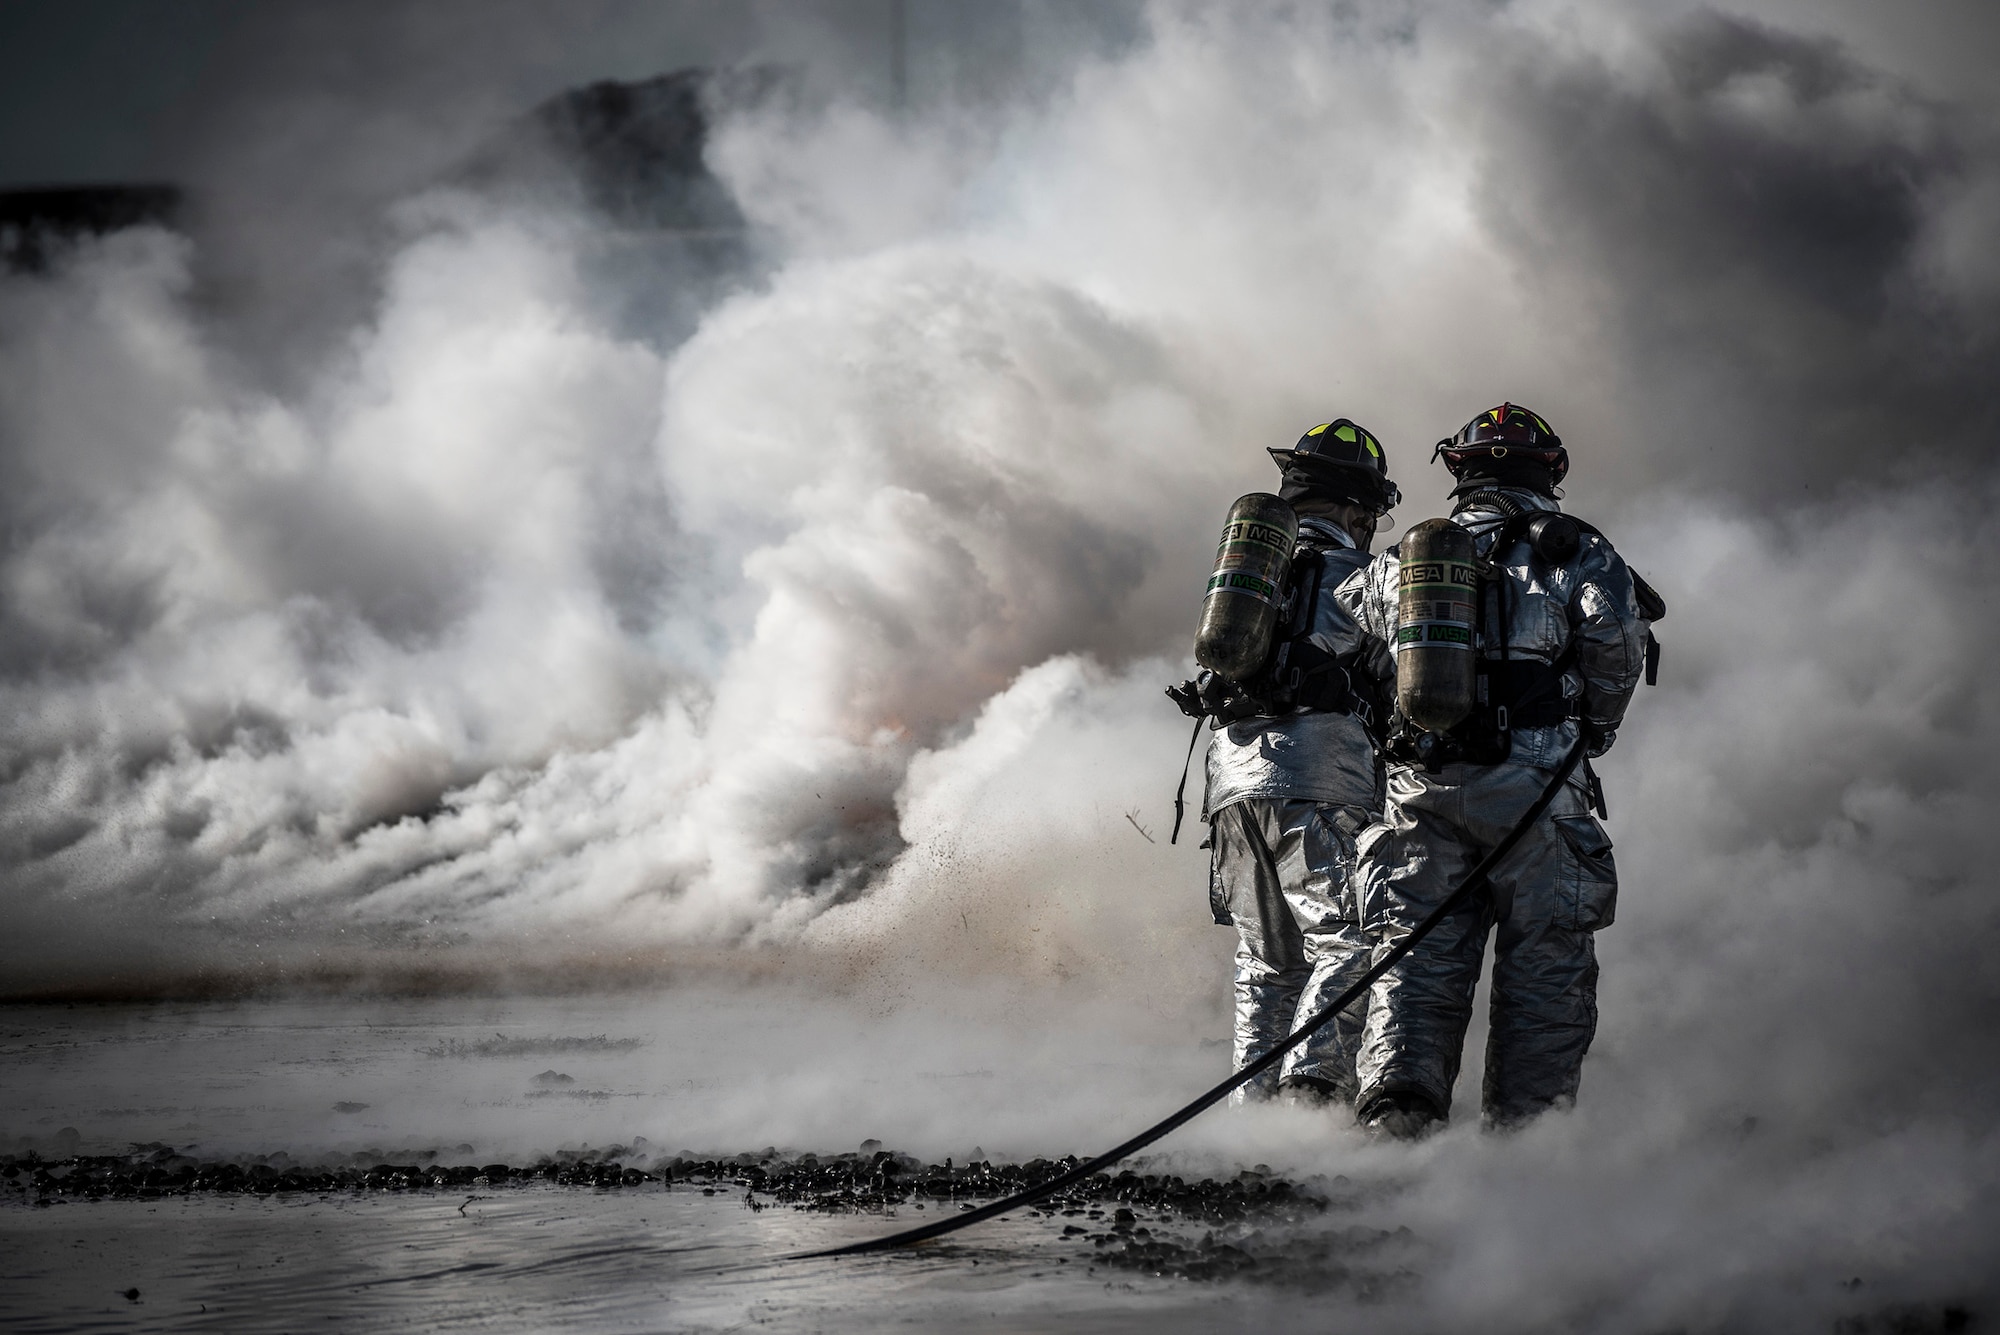 MOUNTAIN HOME AIR FORCE BASE, Idaho -- Firefighters from the 366th Civil Engineer Squadron extinguish a fire during a live fire training exercise as part of a base-wide operational readiness exercise March 4, 2013, at Mountain Home Air Force Base, Idaho. Two teams had to work in unison to push the fire back without it reigniting behind them. (U.S. Air Force photo/Tech. Sgt. Samuel Morse)